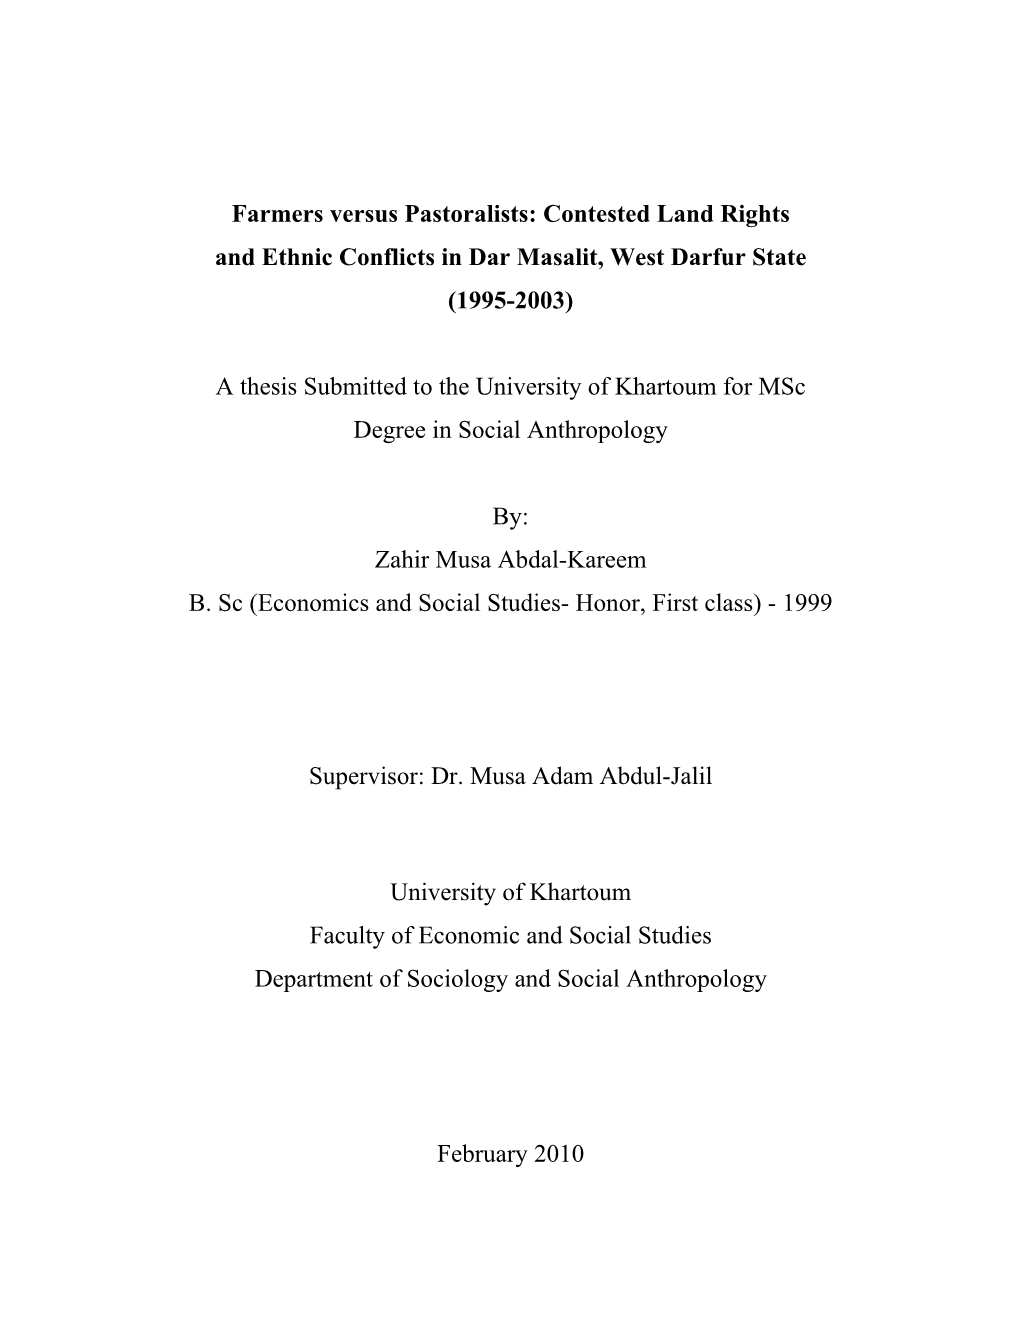 Contested Land Rights and Ethnic Conflicts in Dar Masalit, West Darfur State (1995-2003)